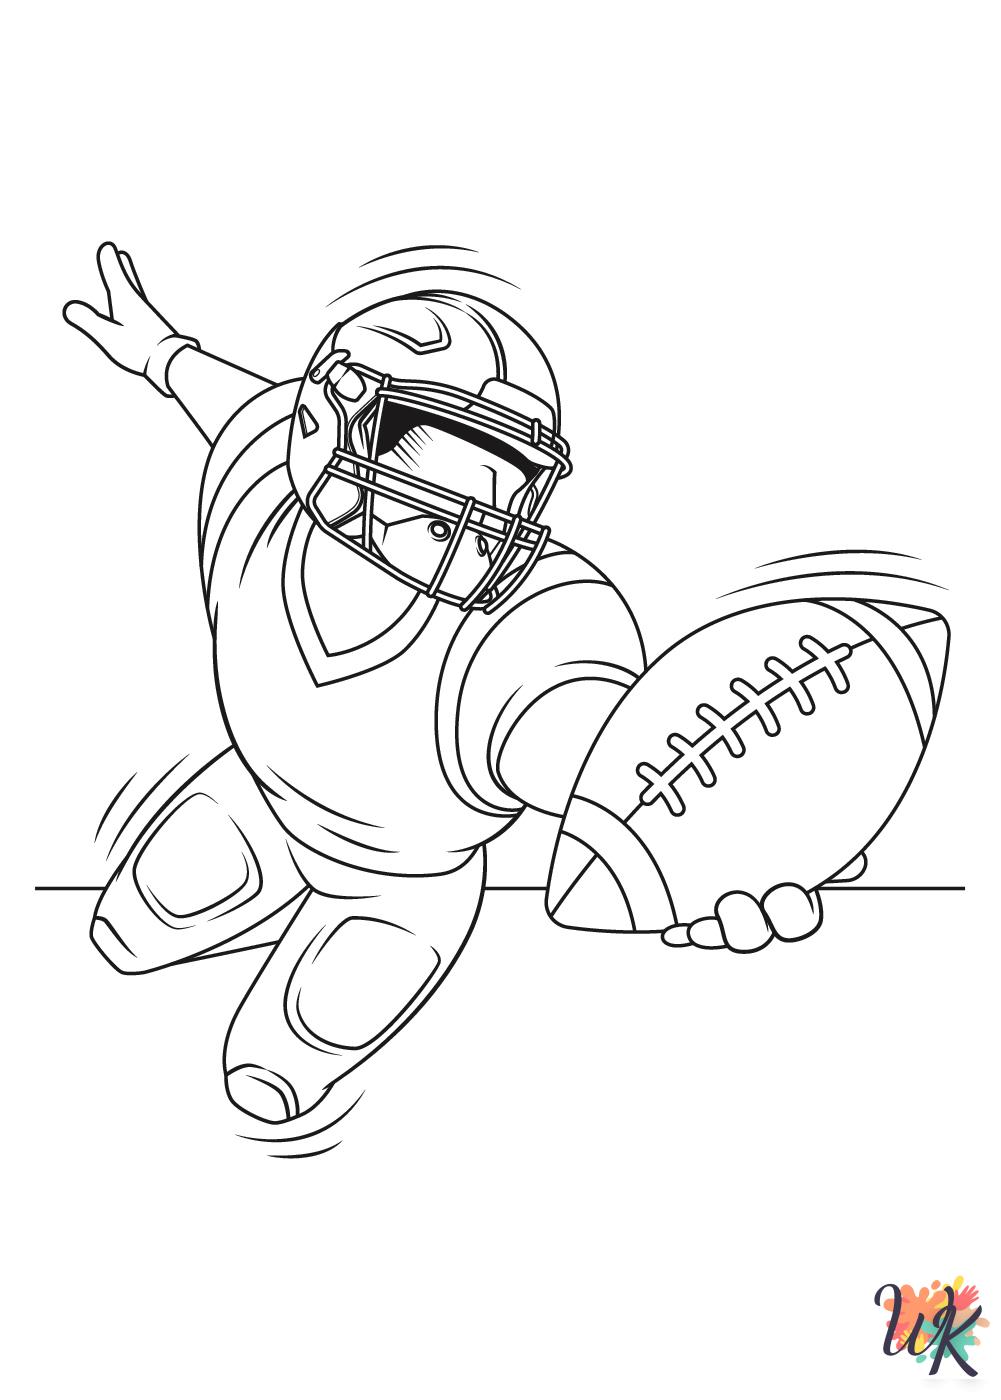 NFL Coloring Pages 15